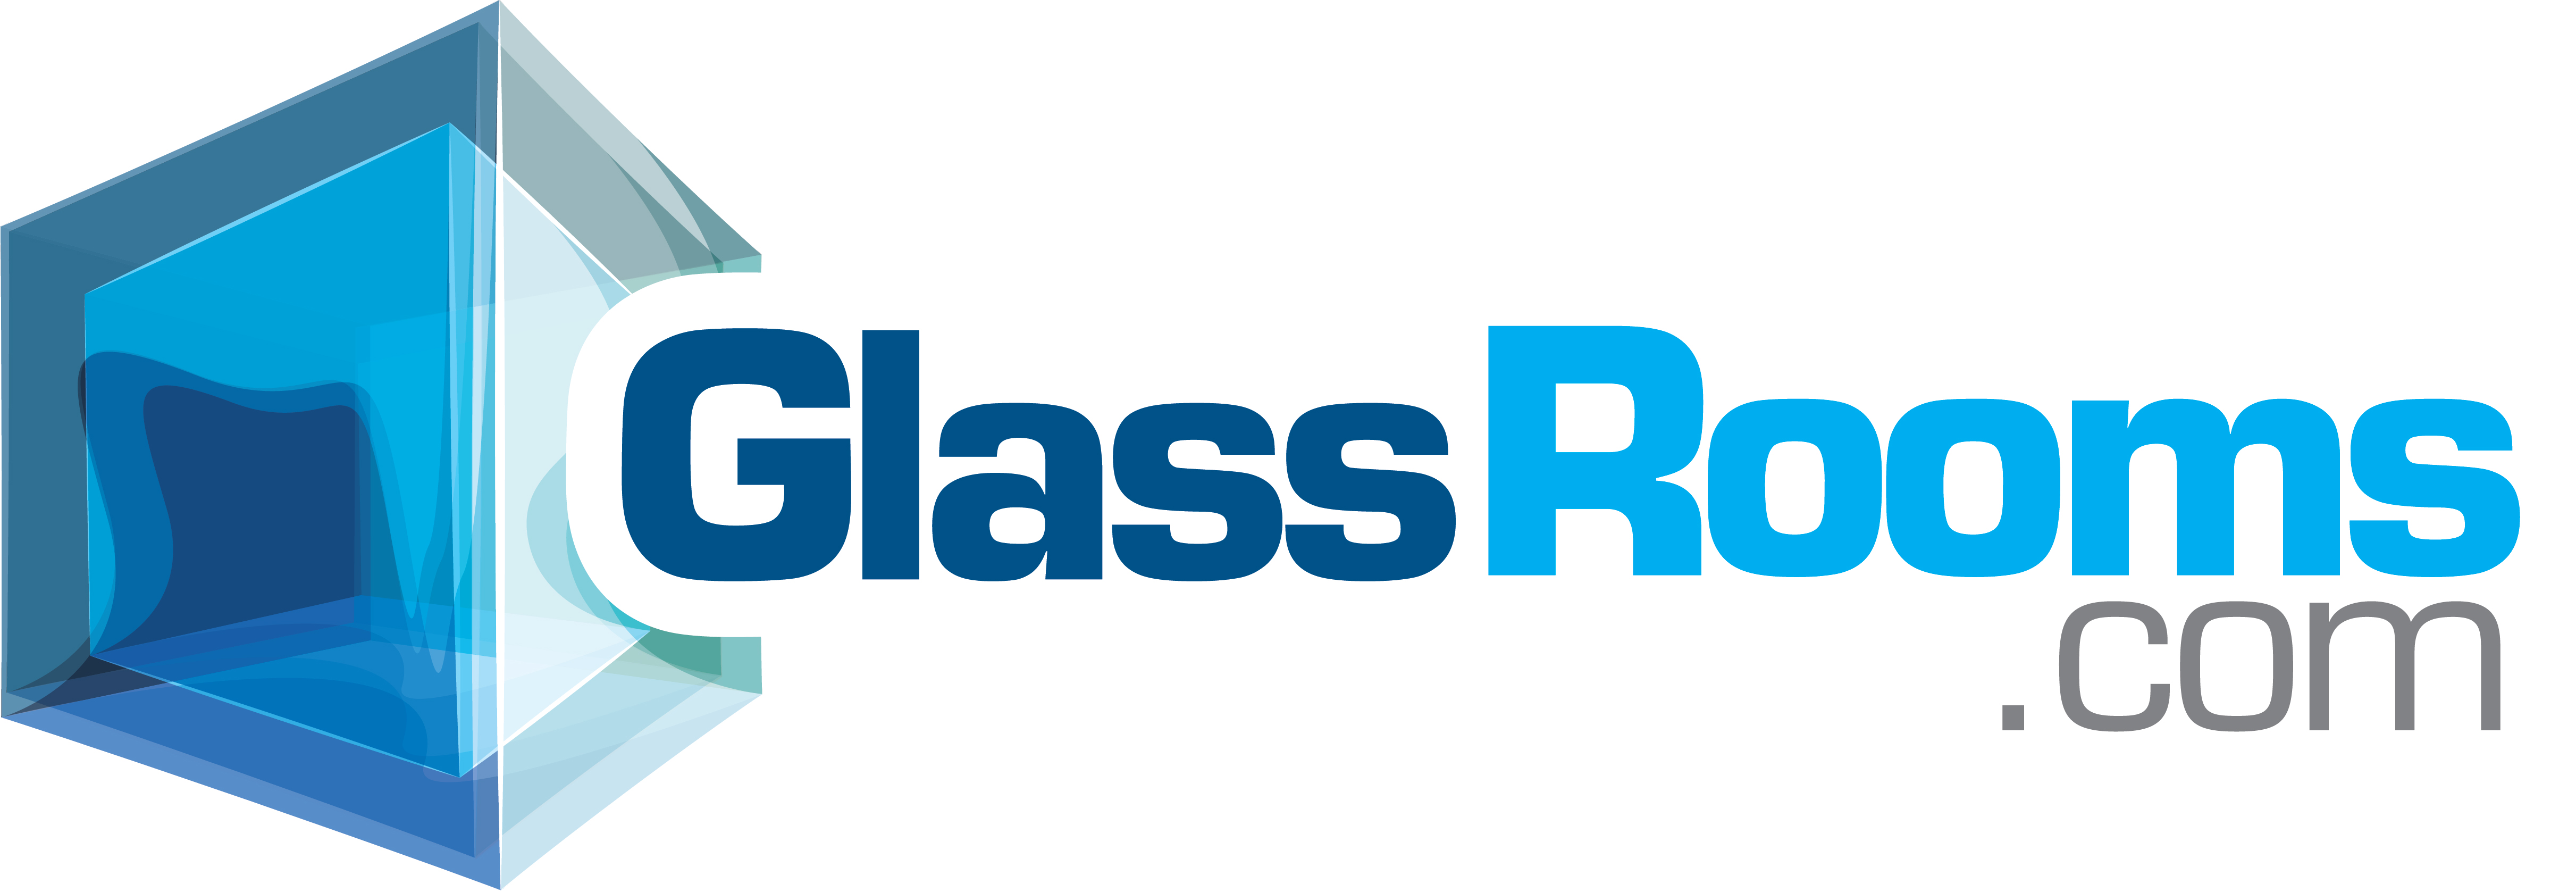 Glass Rooms Middle East